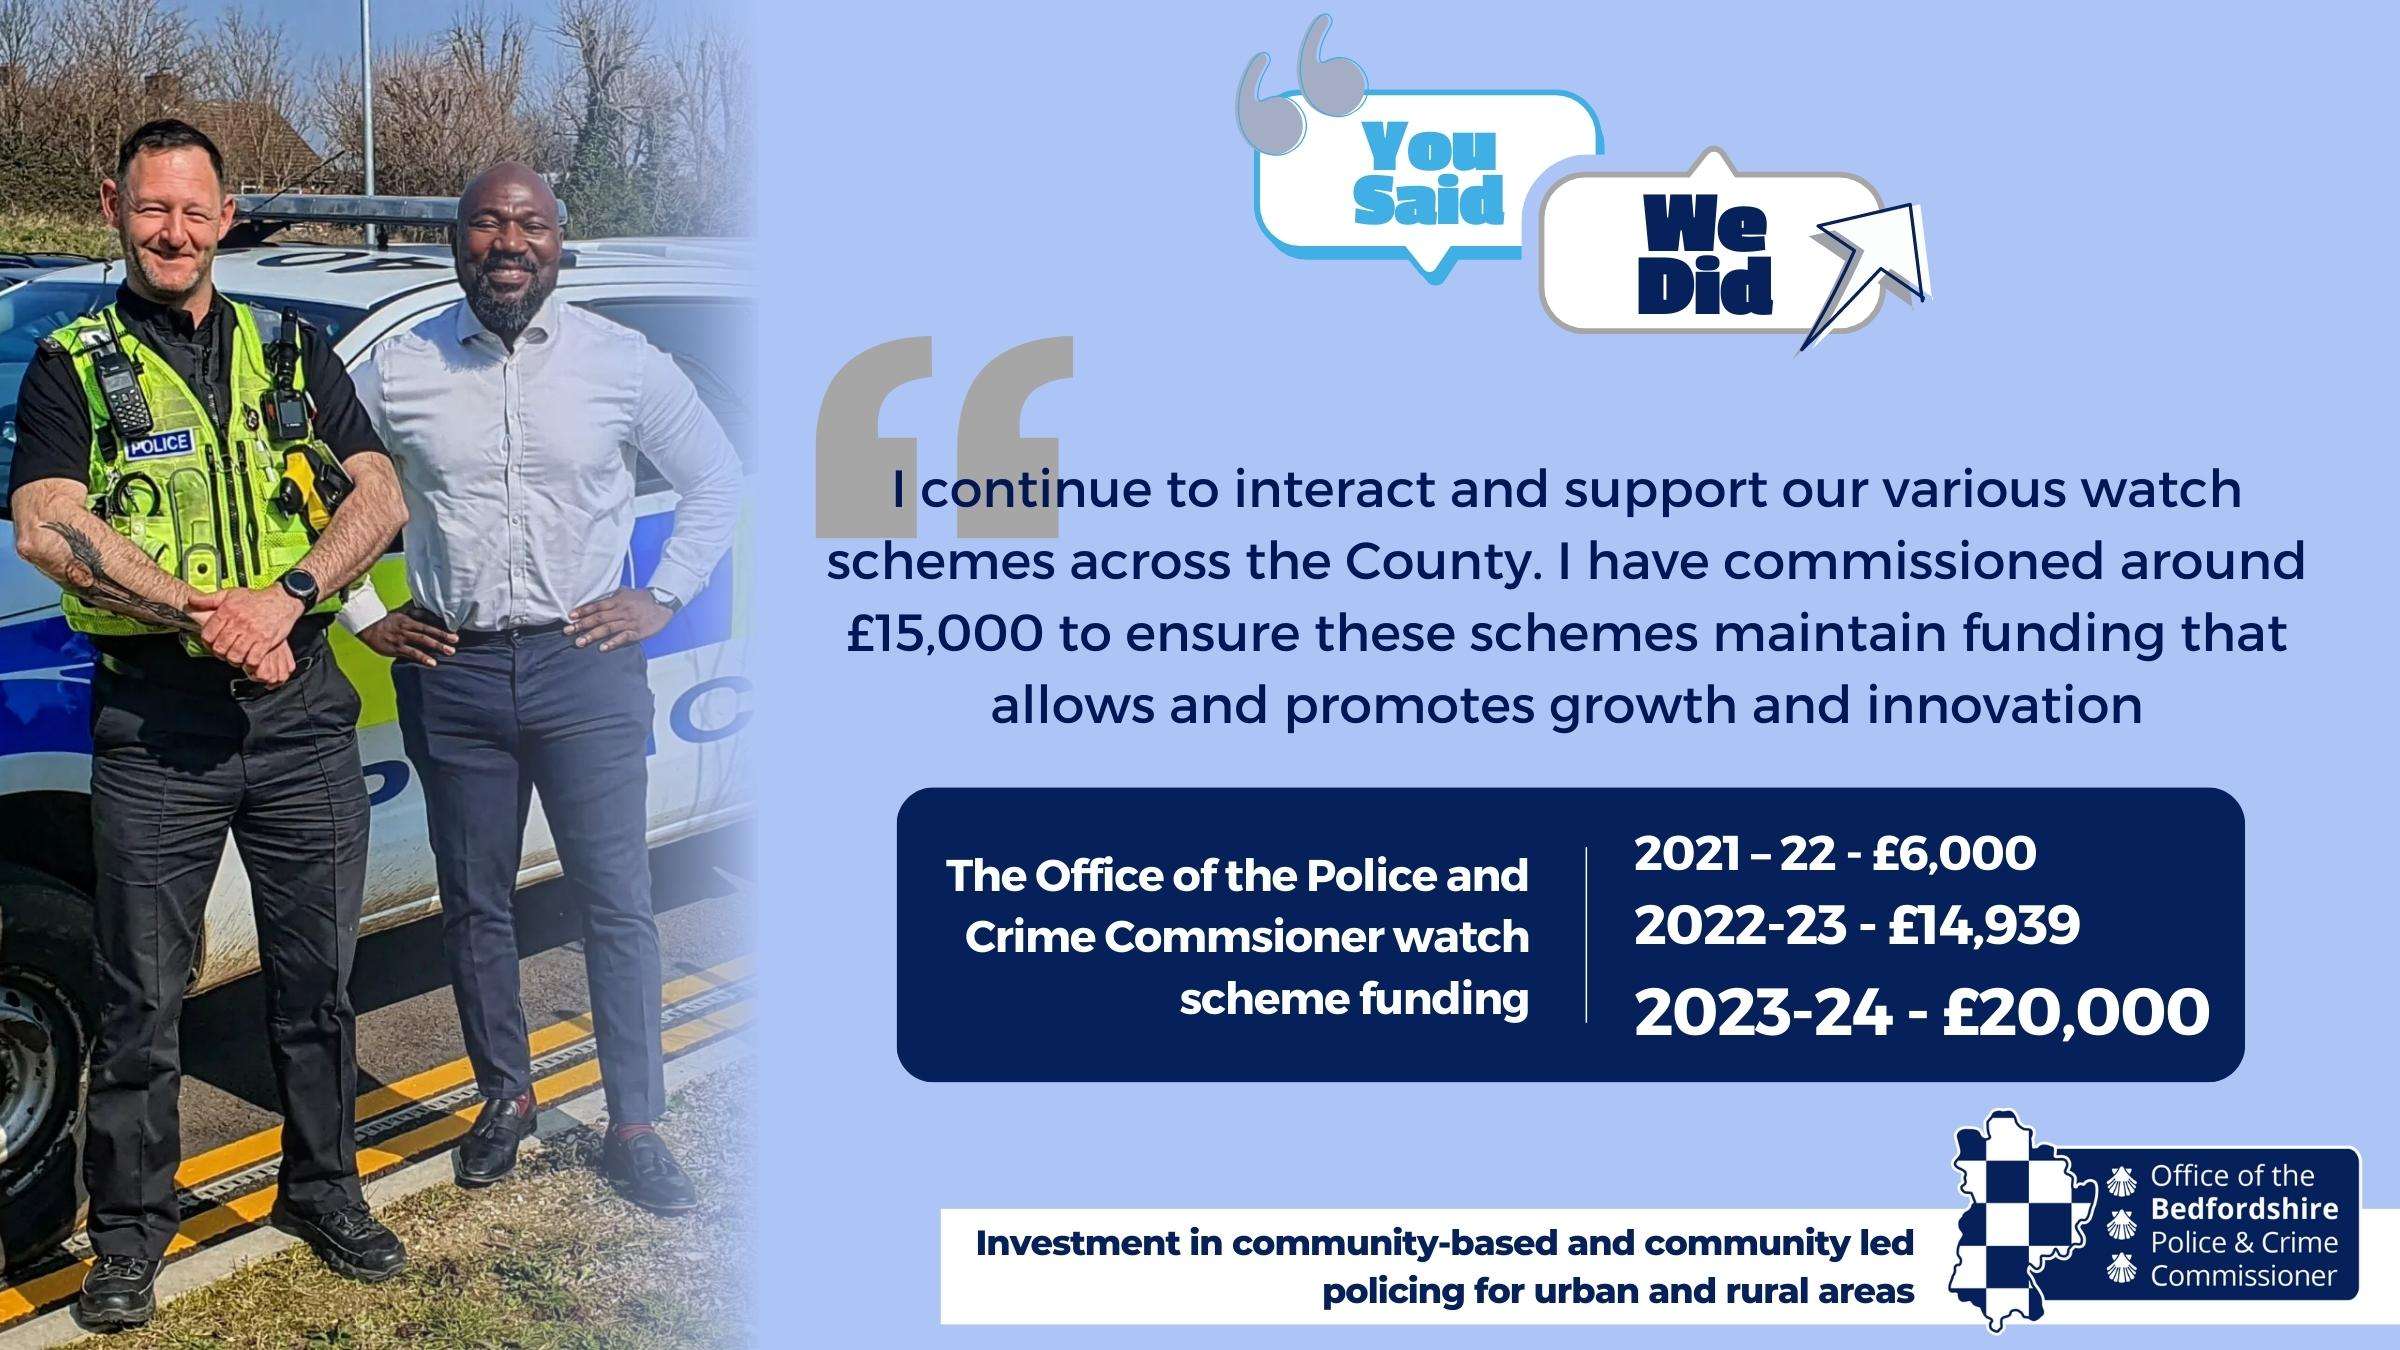 Priority 1, investment in community-based and community-led policing